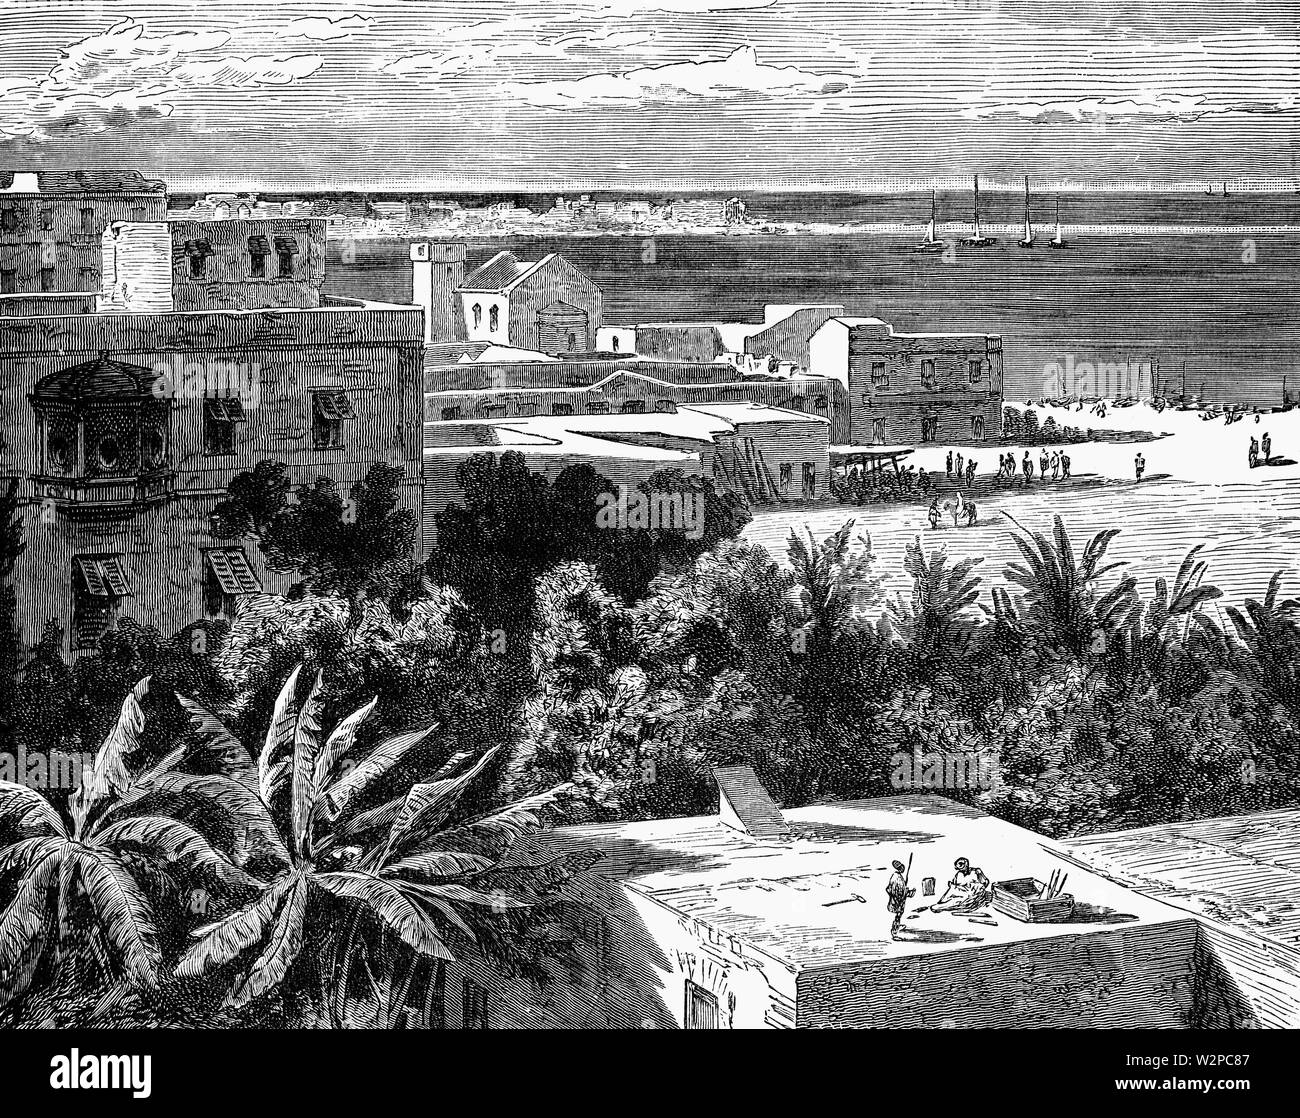 A view of Port of Alexandria in the Nile Delta between the Mediterranean Sea and Mariut Lake in Alexandria, Egypt. Built in 1900 BCE, it is one of the oldest ports in the world, but over the centuries sand and silt deposits made the port unnavigable. It was cleared by forces under the command of Alexander the Great in 331 BC as part of the construction of Alexandria city to be the marine base for his fleet. Alexander's engineer Dinocrat linked the port of Alexandria and the island of Pharos with a bridge  creating two harbour basins for commercial and military shipping. In the Ptolemy era a se Stock Photo